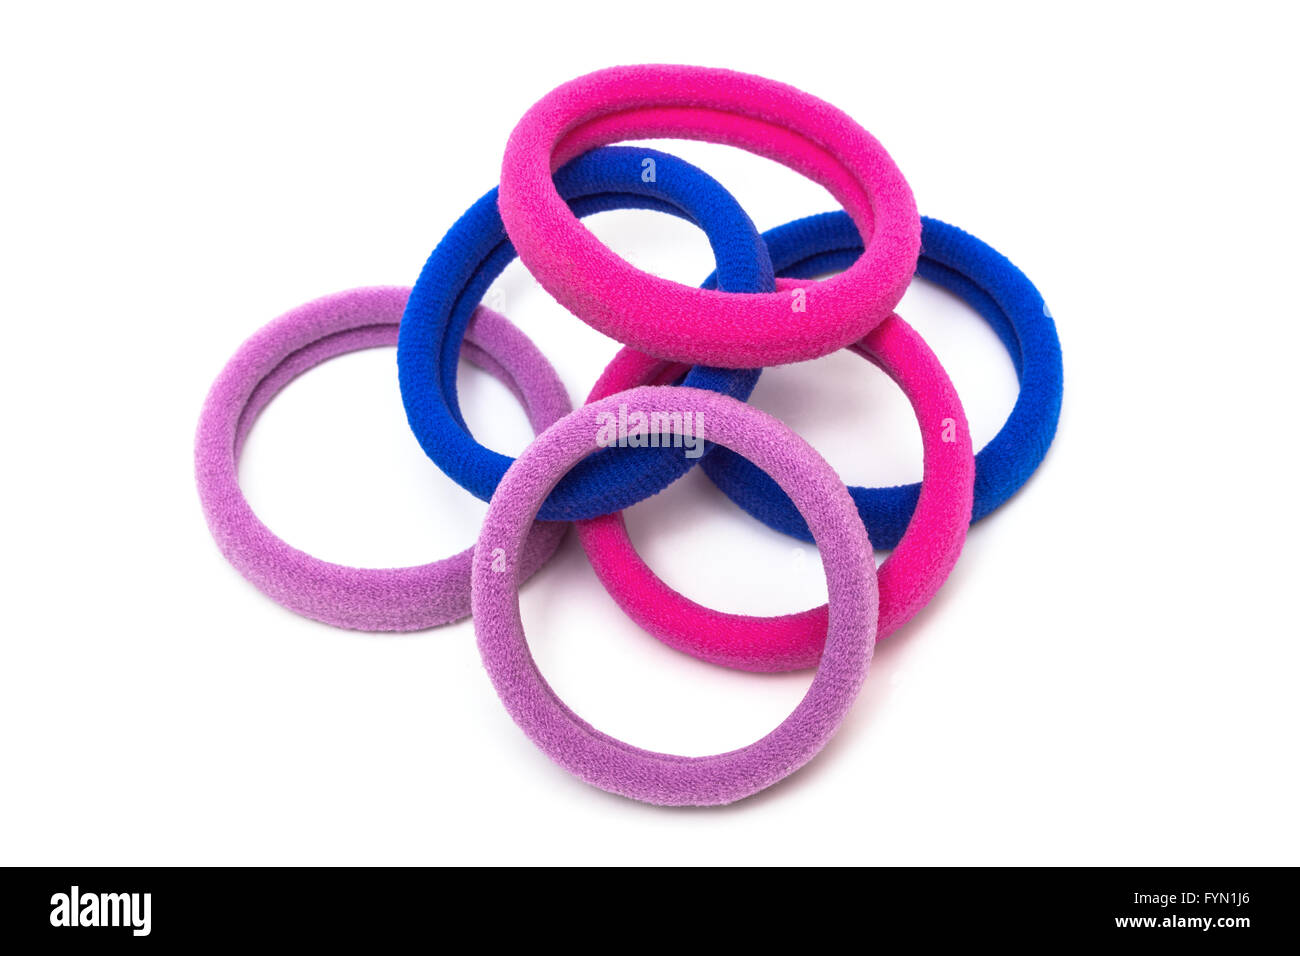 rubber bands for hair Stock Photo